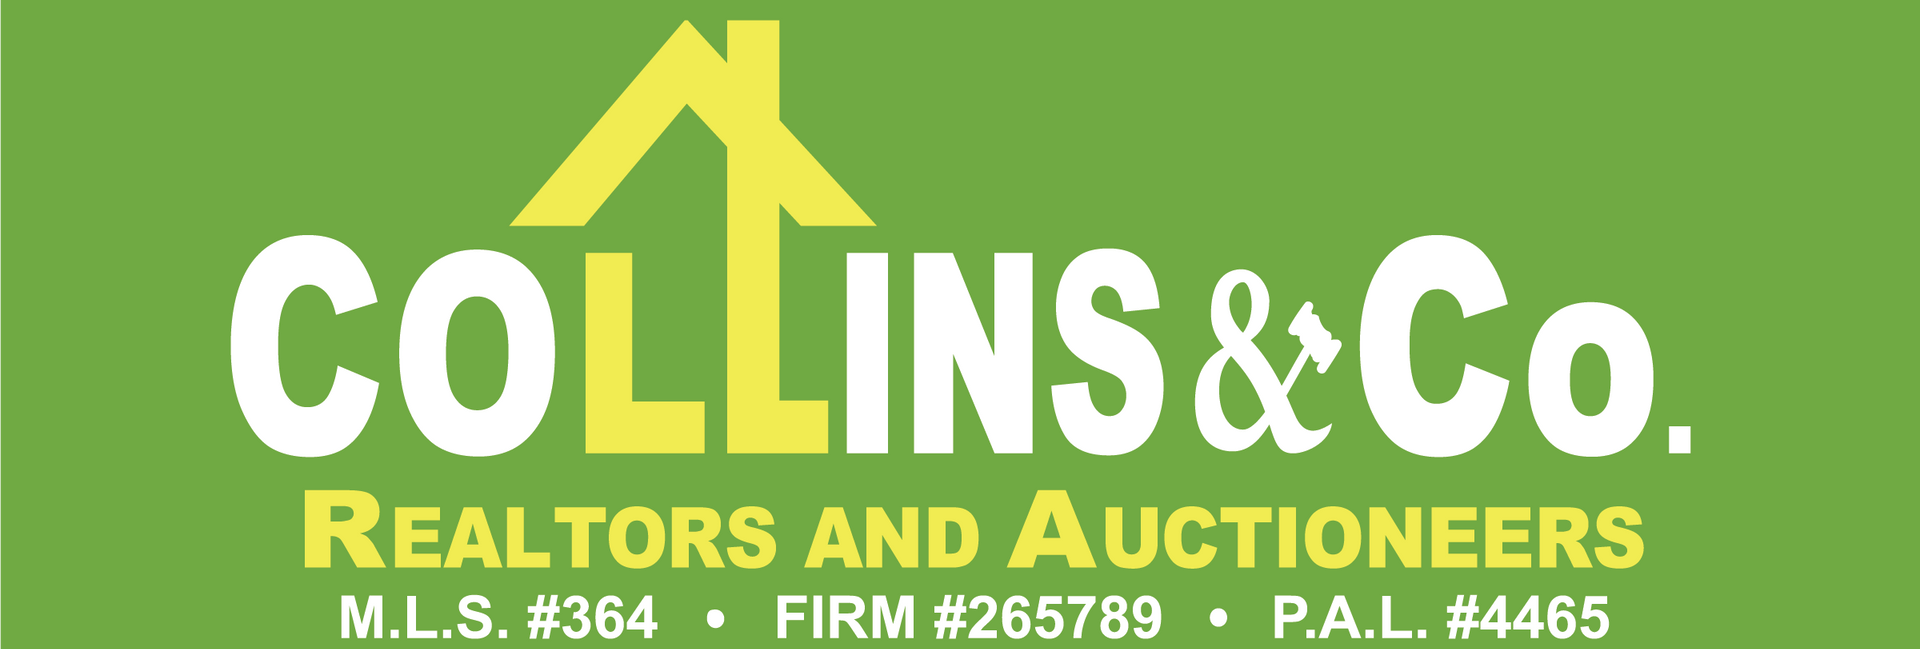 Collins & Co. Realtor And Auctioneers Logo with MLS #364 - Firm #265789 - P.A.L. #4465